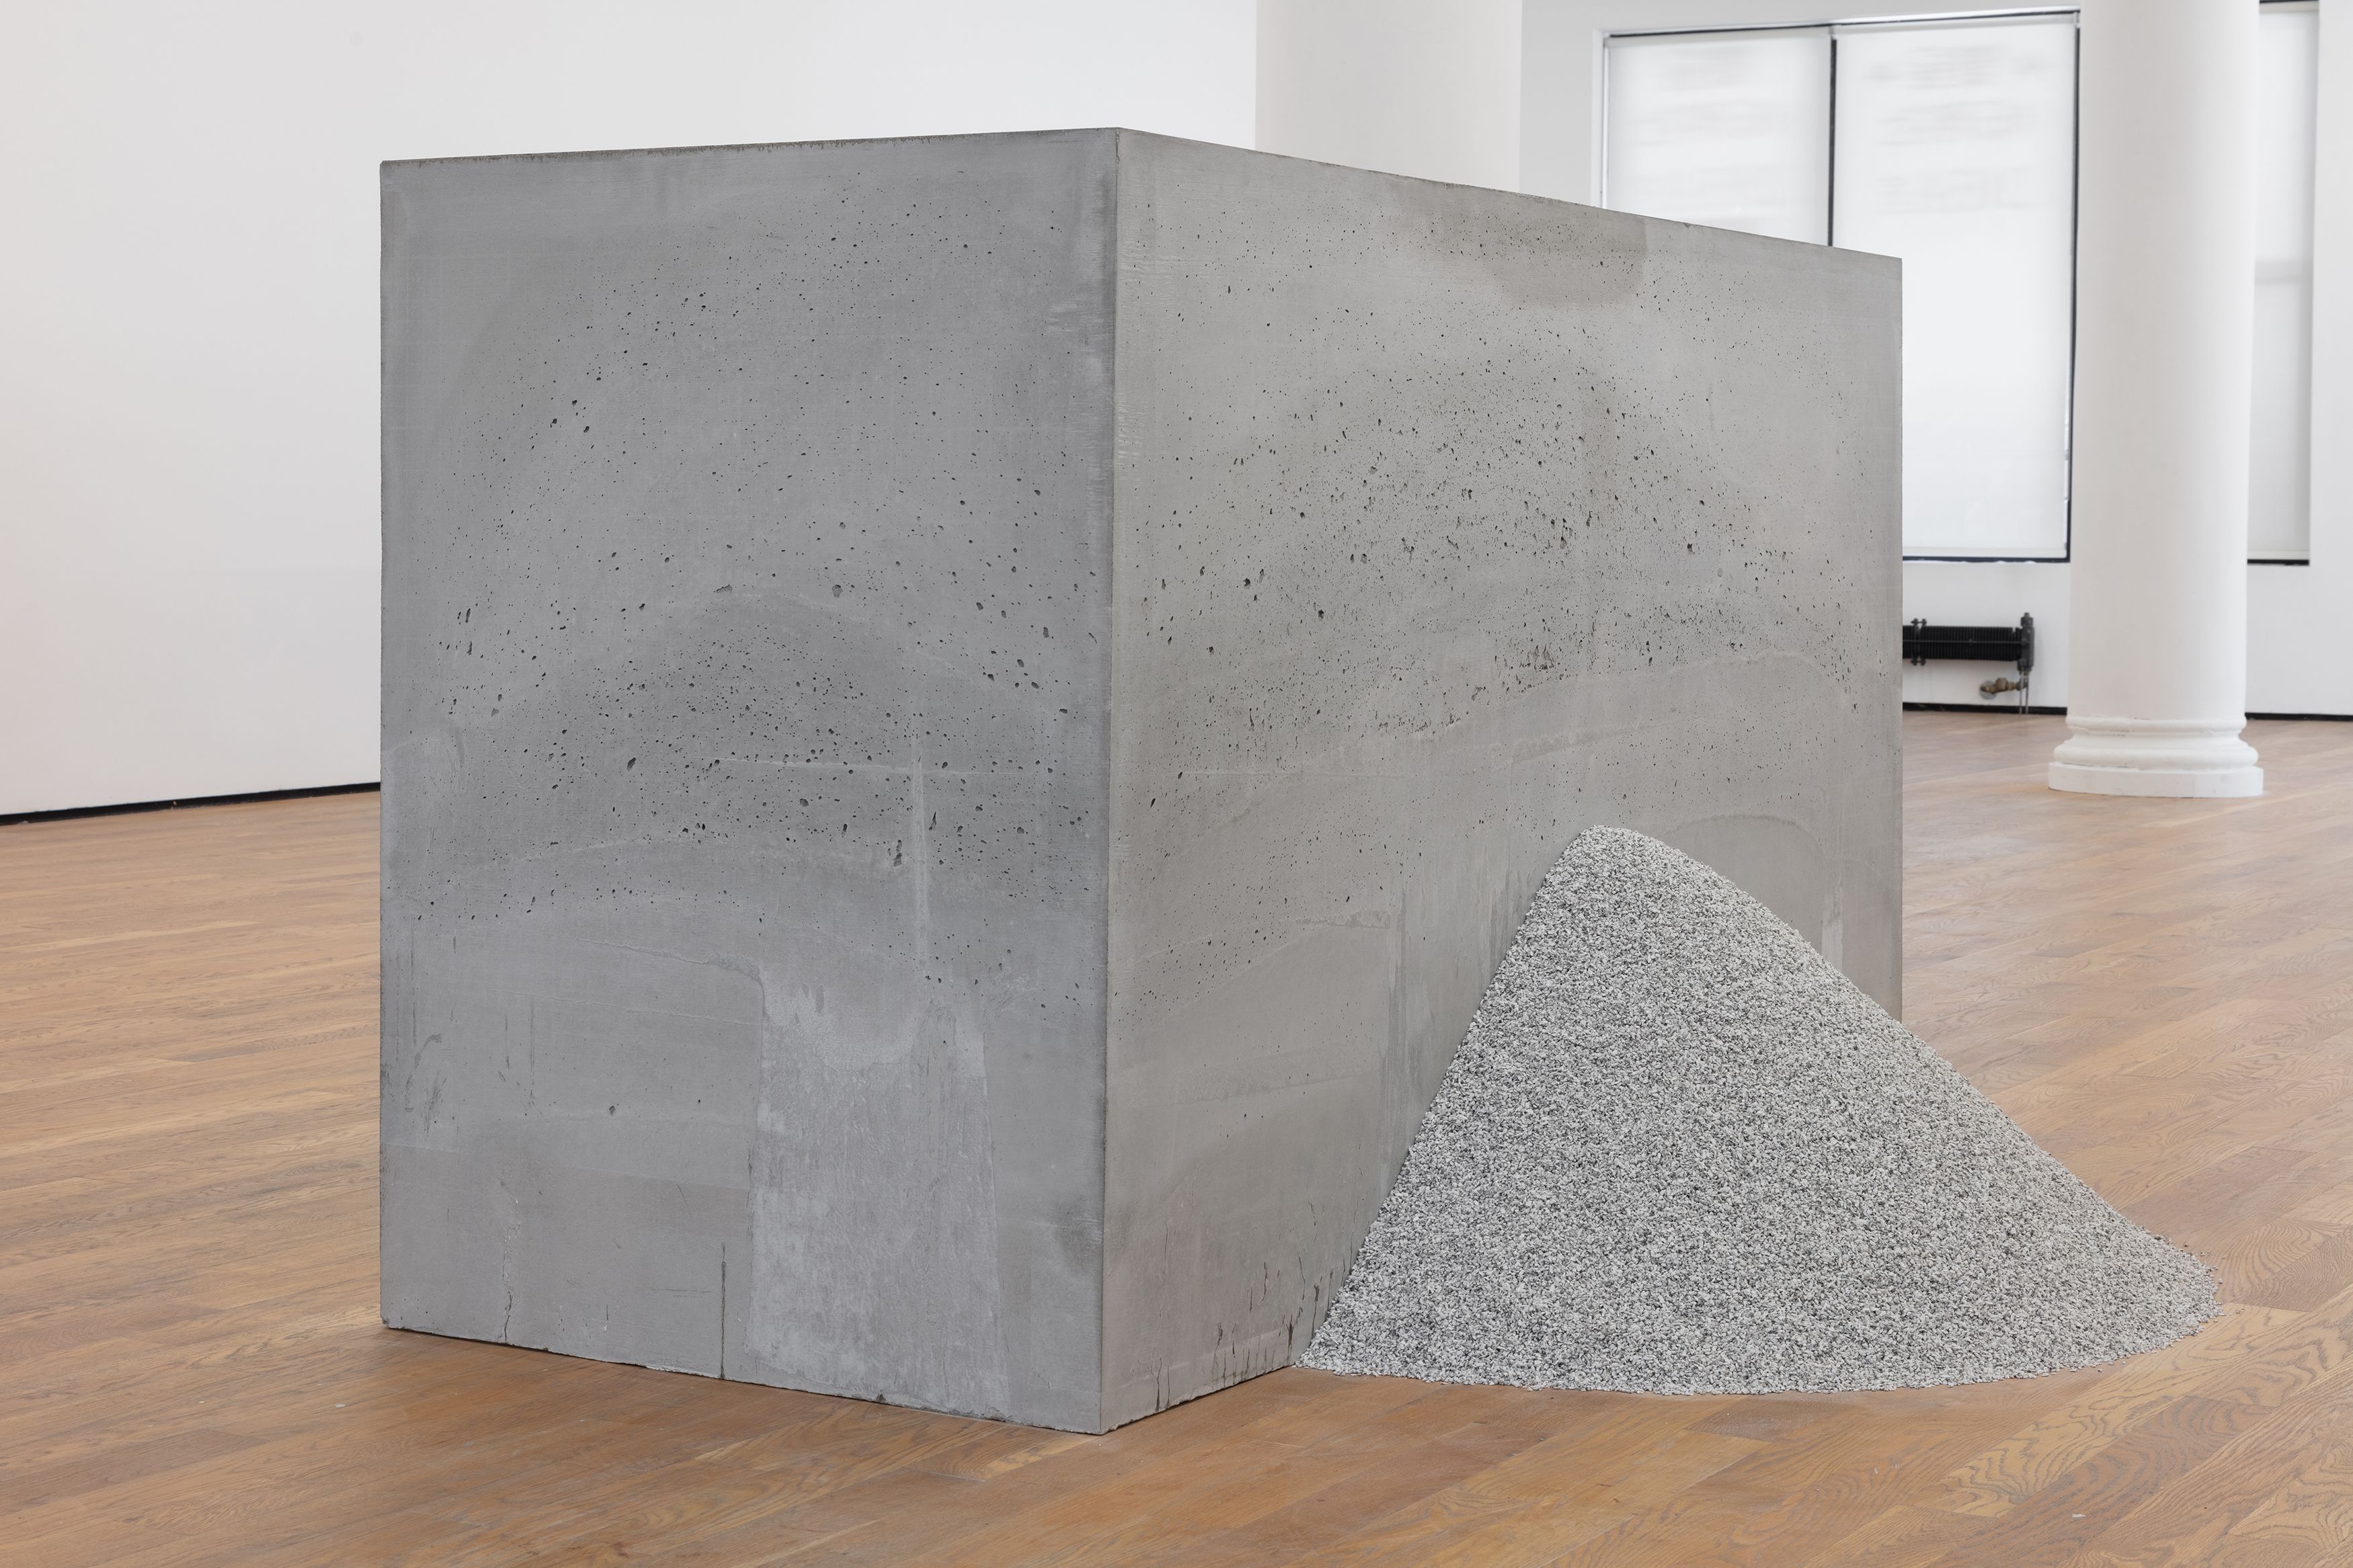 Stephen Lichty, Repose 1, 2021, concrete and crushed granite, 44 x 77 x 58 in. (111.76 x 195.58 x 147.32 cm)